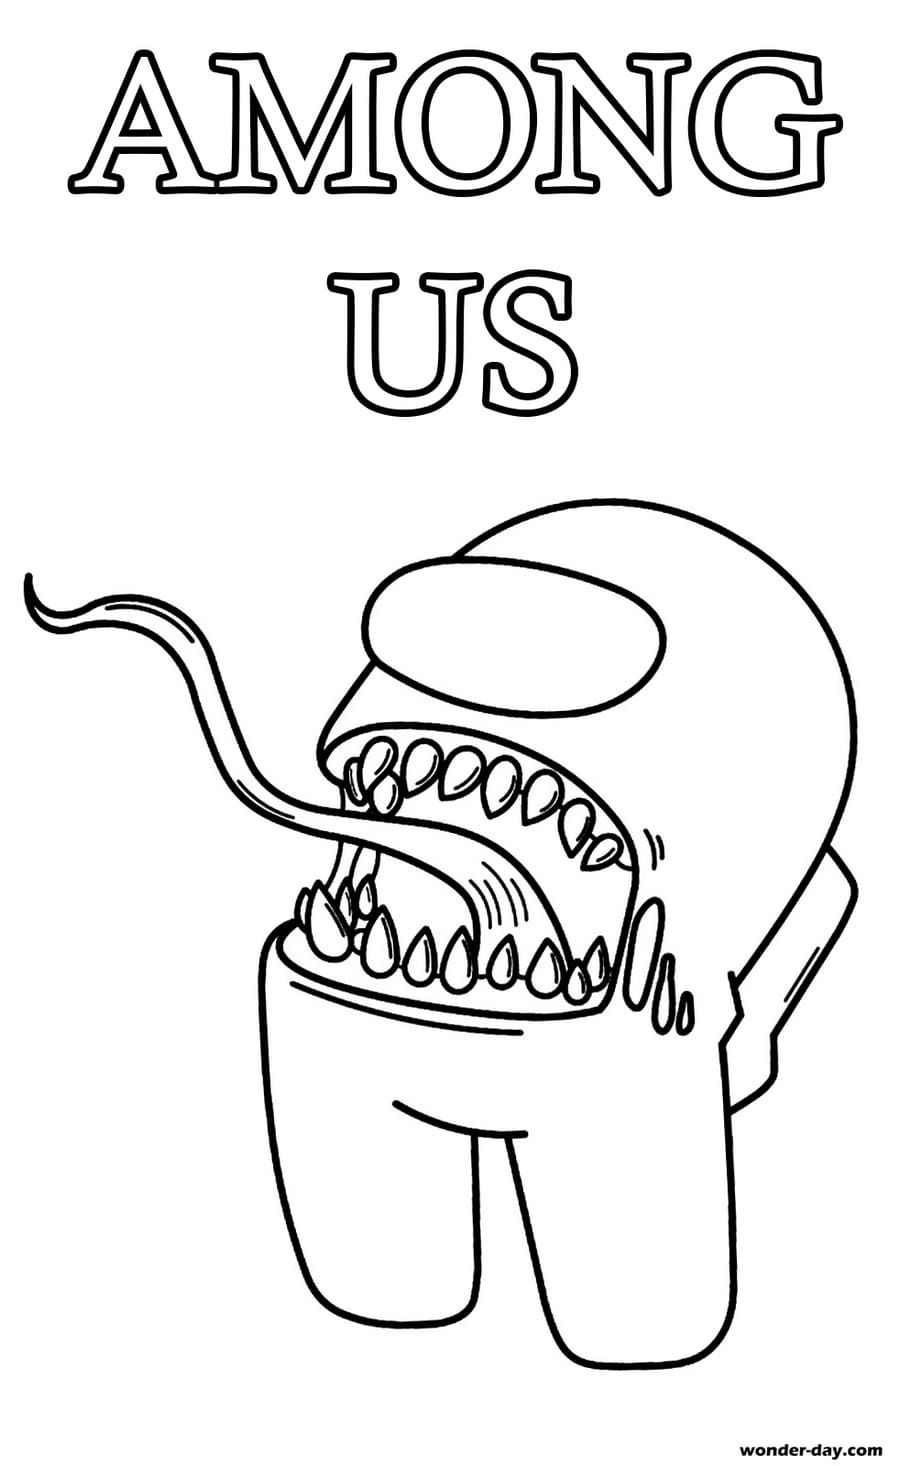 Among Us Coloring Pages / Disegni di Among Us da colorare. Stampa